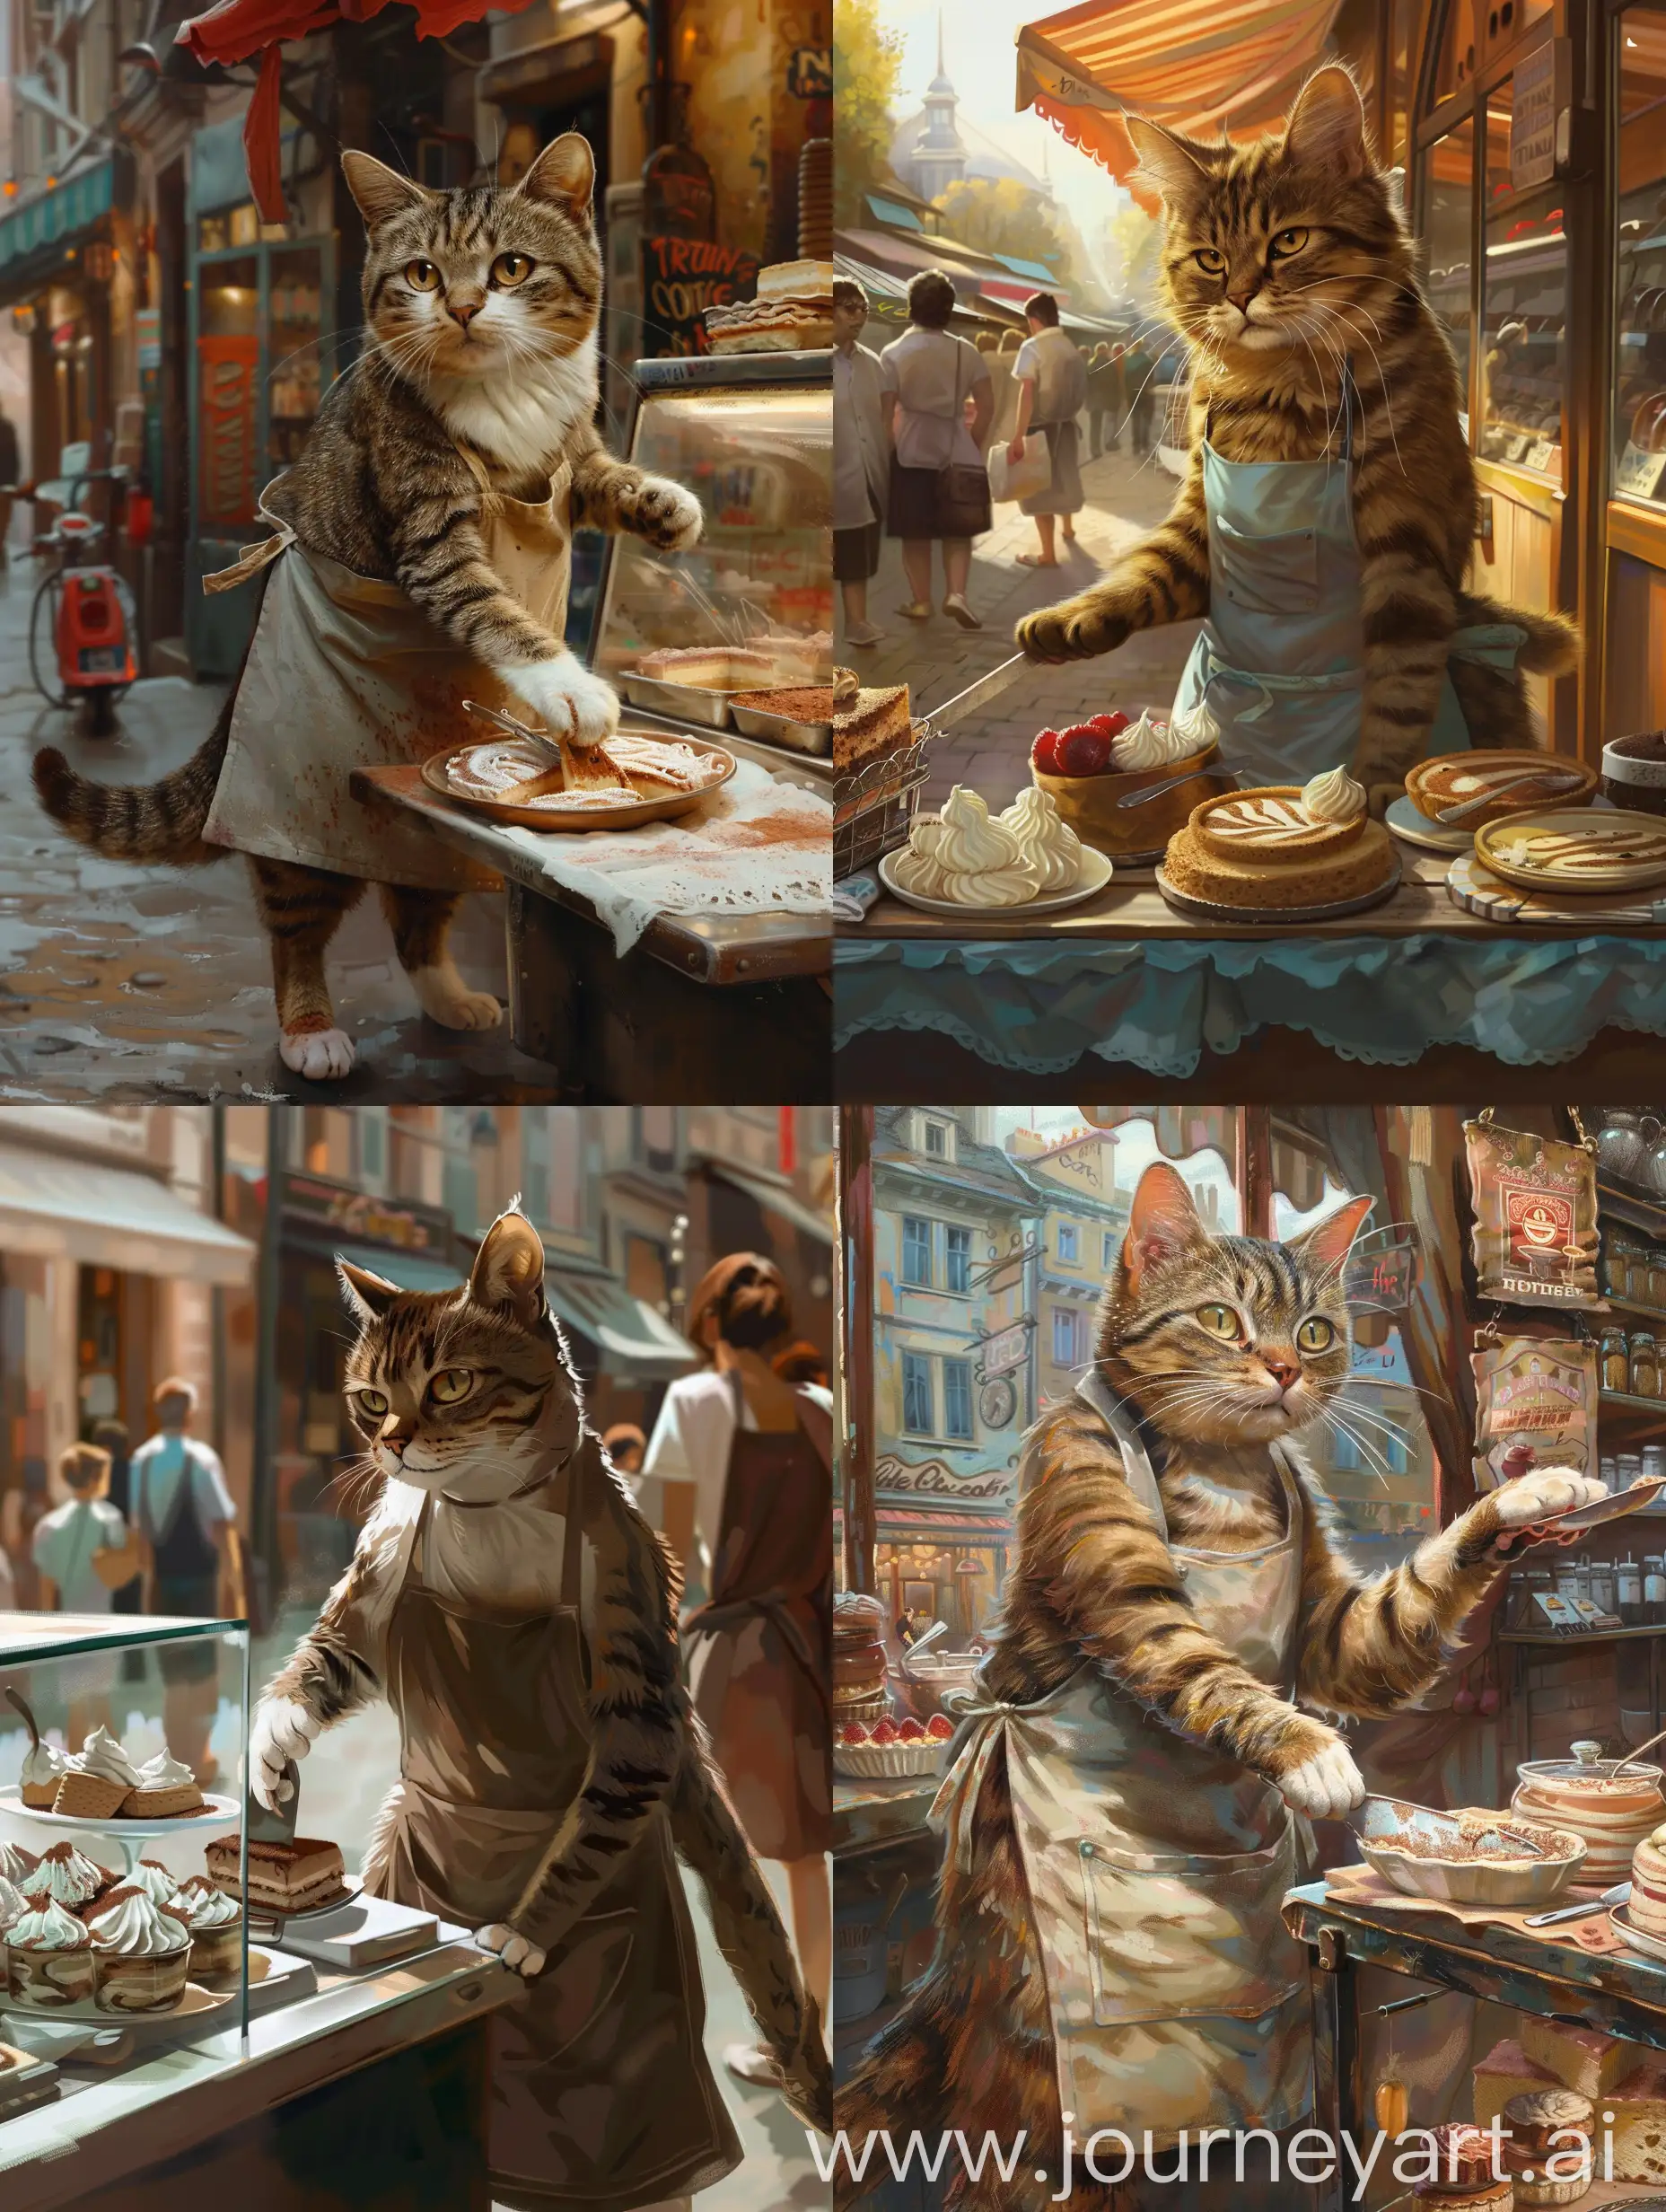 Real-Cat-in-Apron-Selling-Tiramisu-on-Commercial-Street